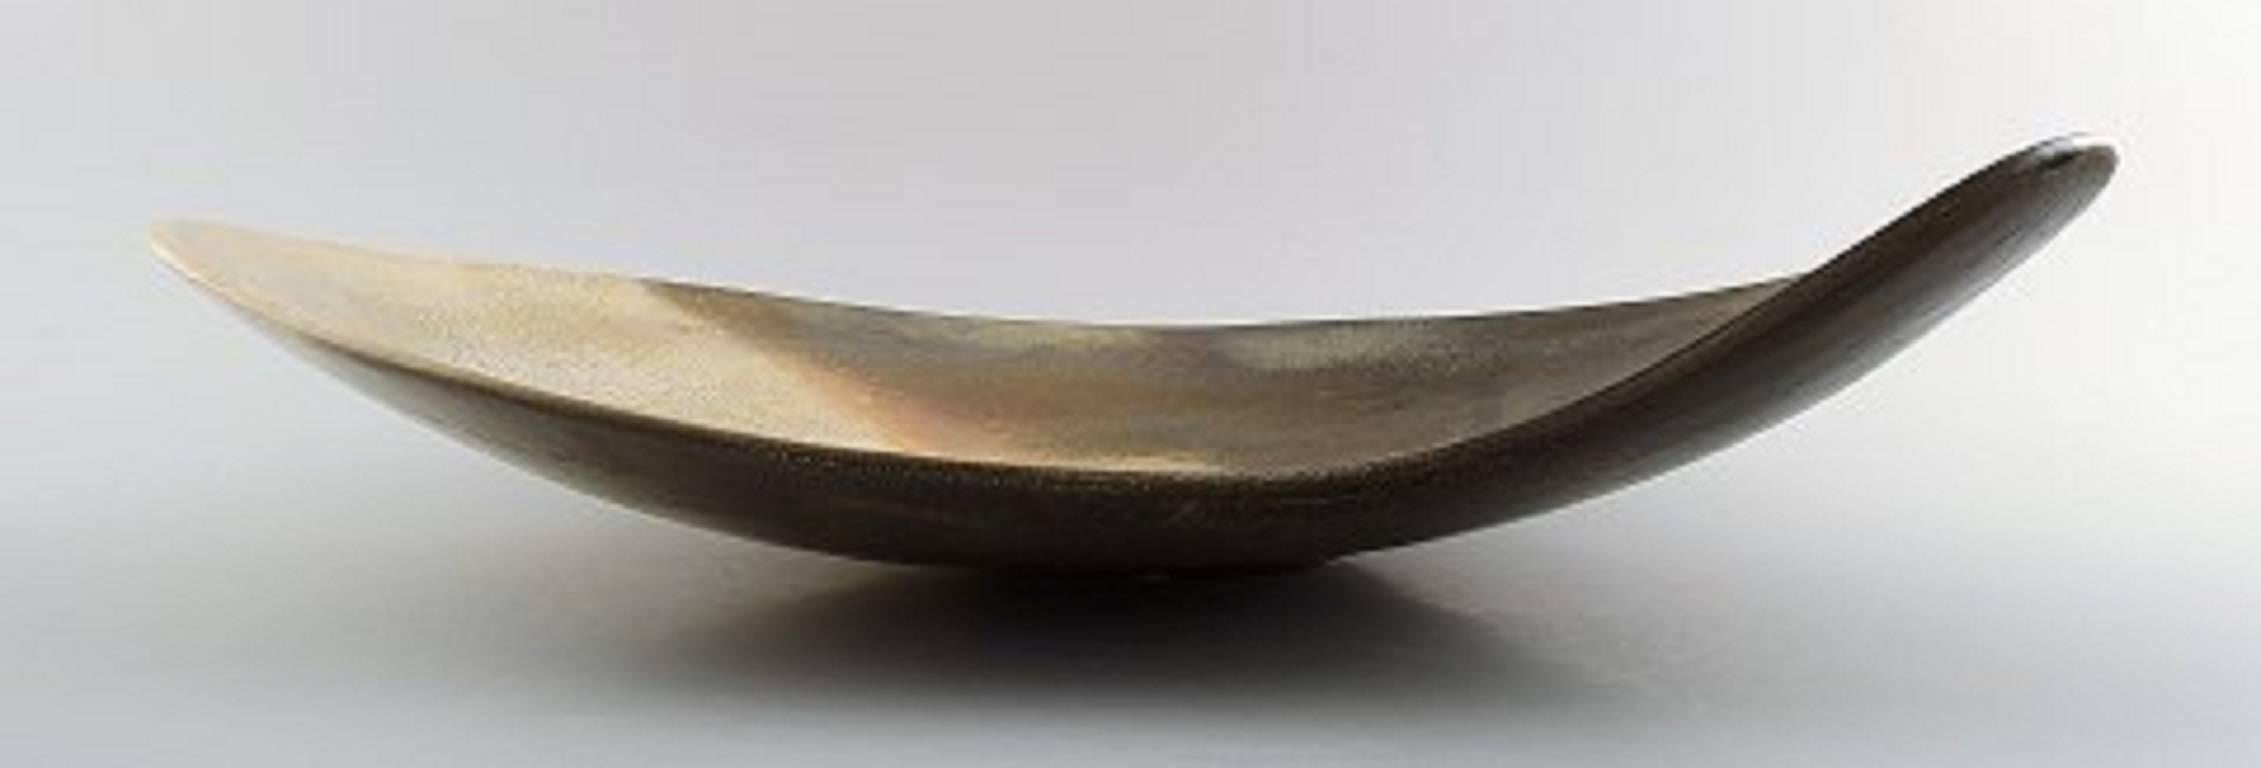 Hans Hedberg (1917-2007), Swedish ceramist.

Unique very large kidney shaped ceramic dish from Hedberg's own workshop in Biot, south of France, circa 1960s.

Hedberg worked with several famous artists, among Picasso, Léger and